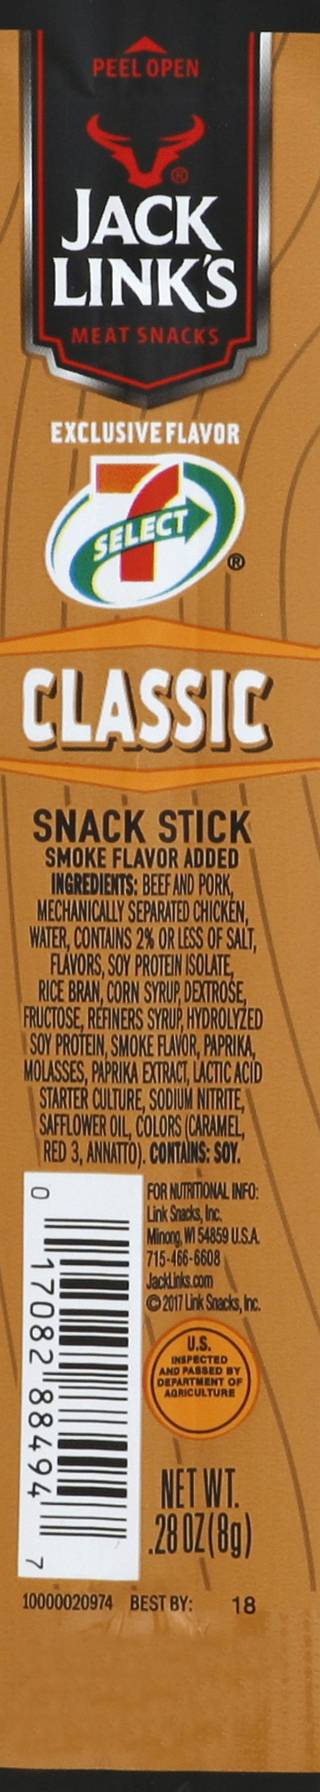 Jack Link's Classic Meat Snack Stick